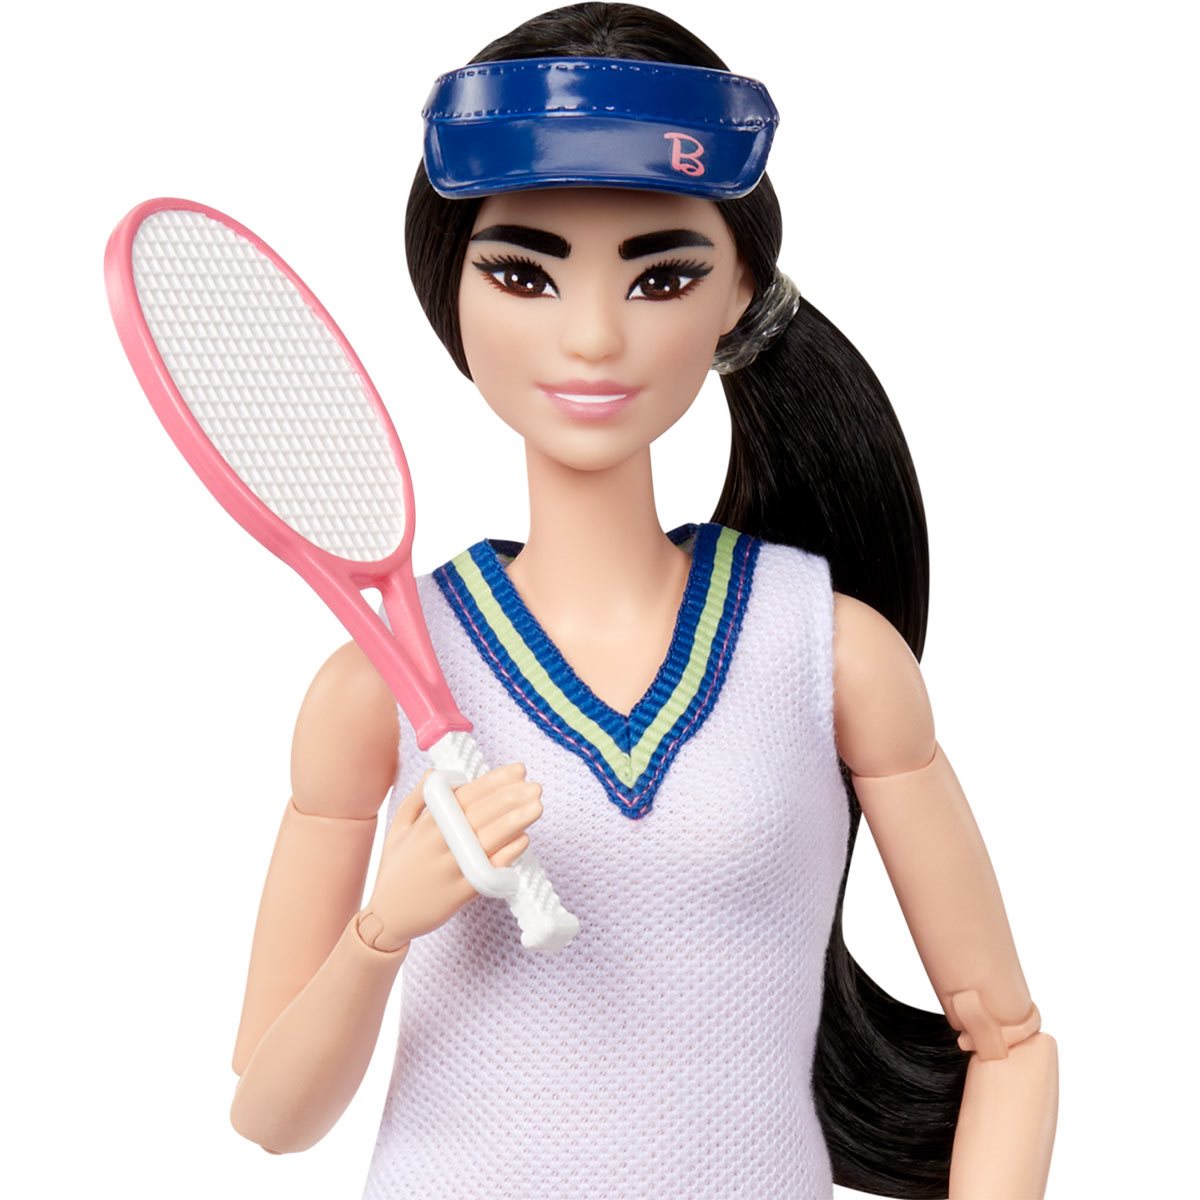 Barbie Made to Move Tennis Player - Earth